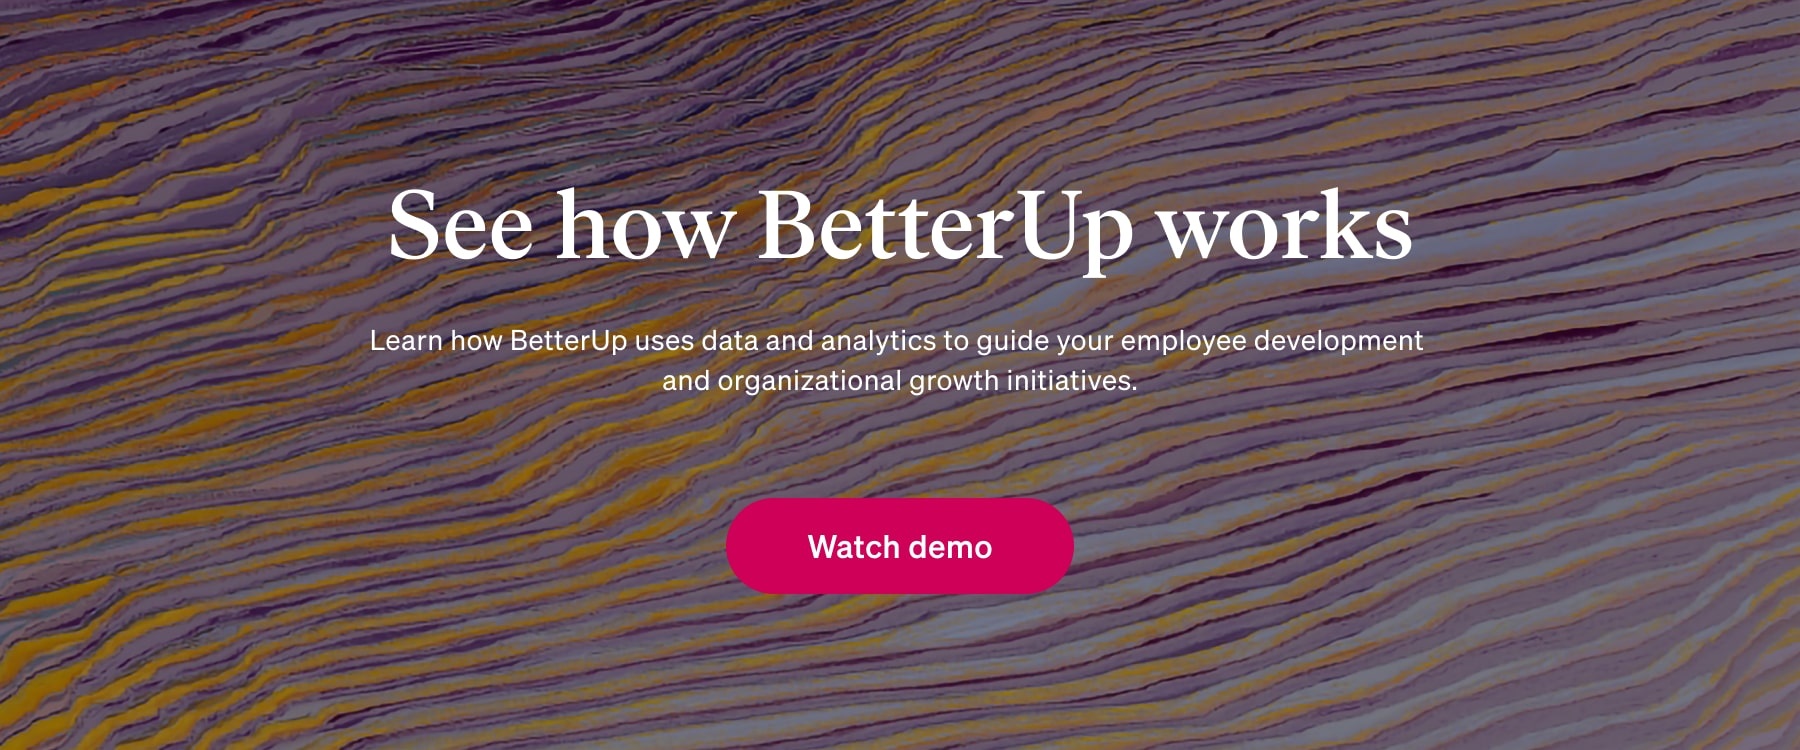 See how BetterUp works - Watch Demo